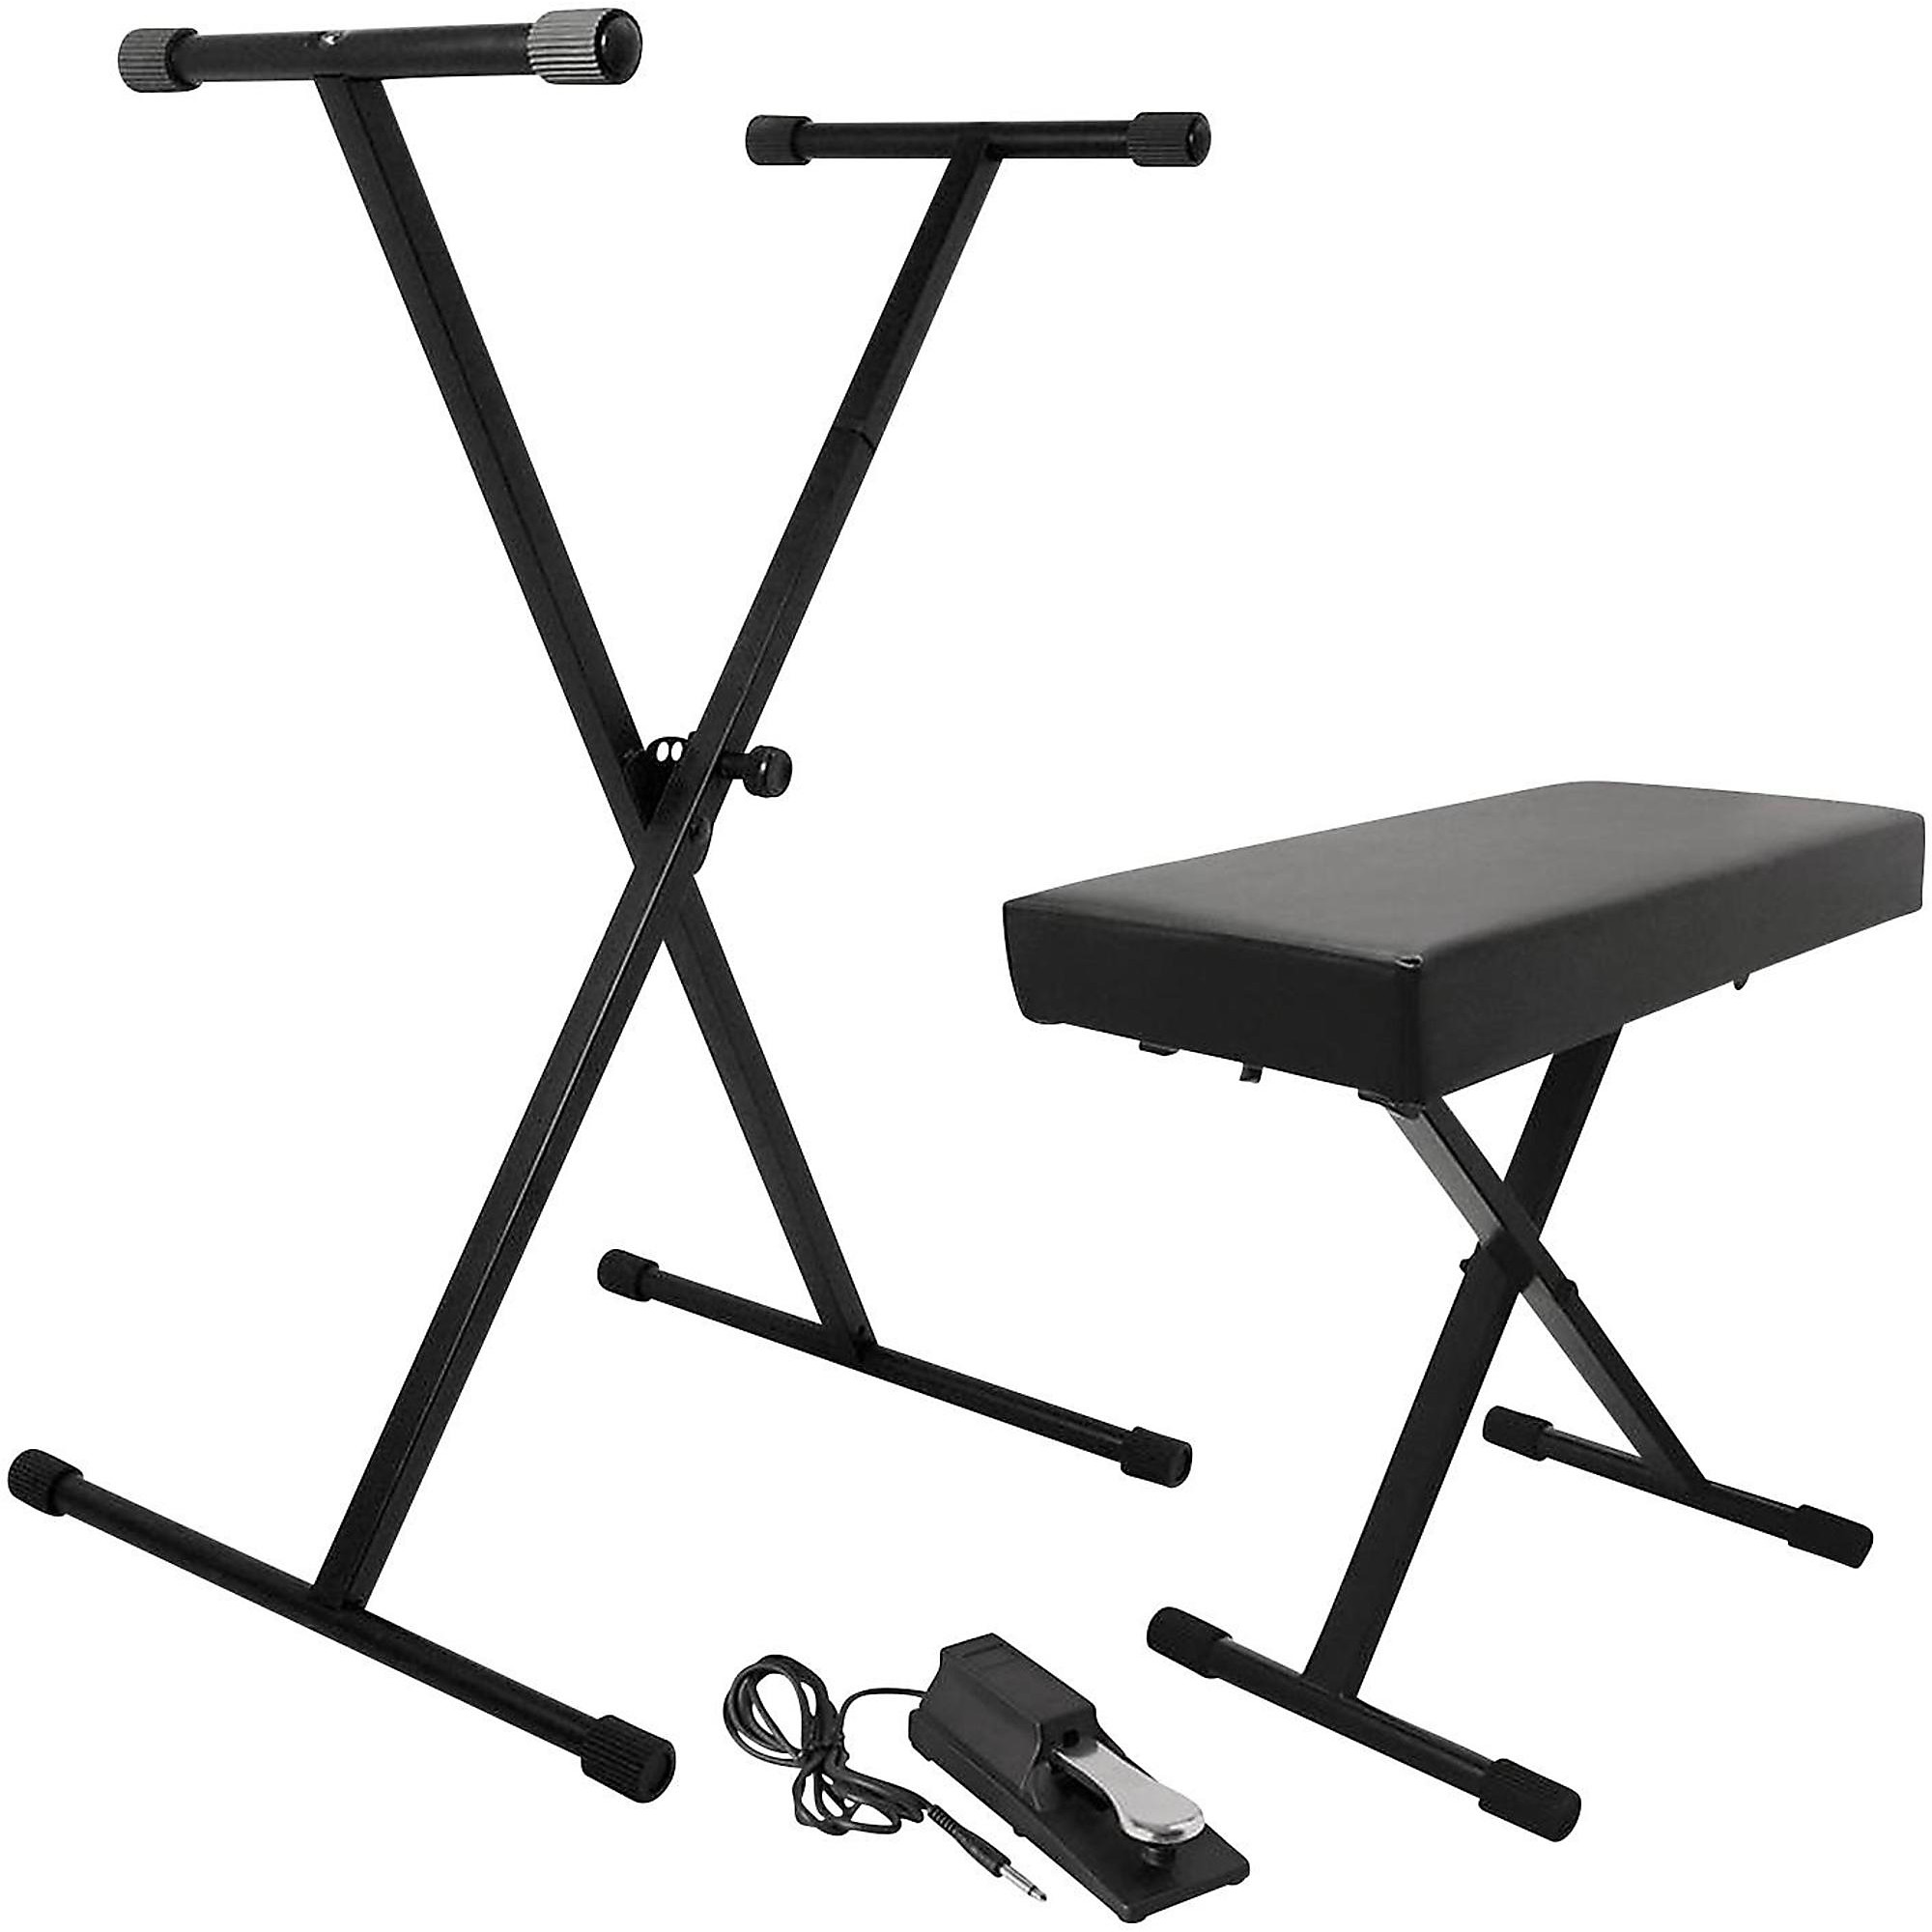 Pack　Sustain　Pedal　Keyboard　With　On-Stage　Stand/Bench　Guitar　KPK6550　KSP100　Center